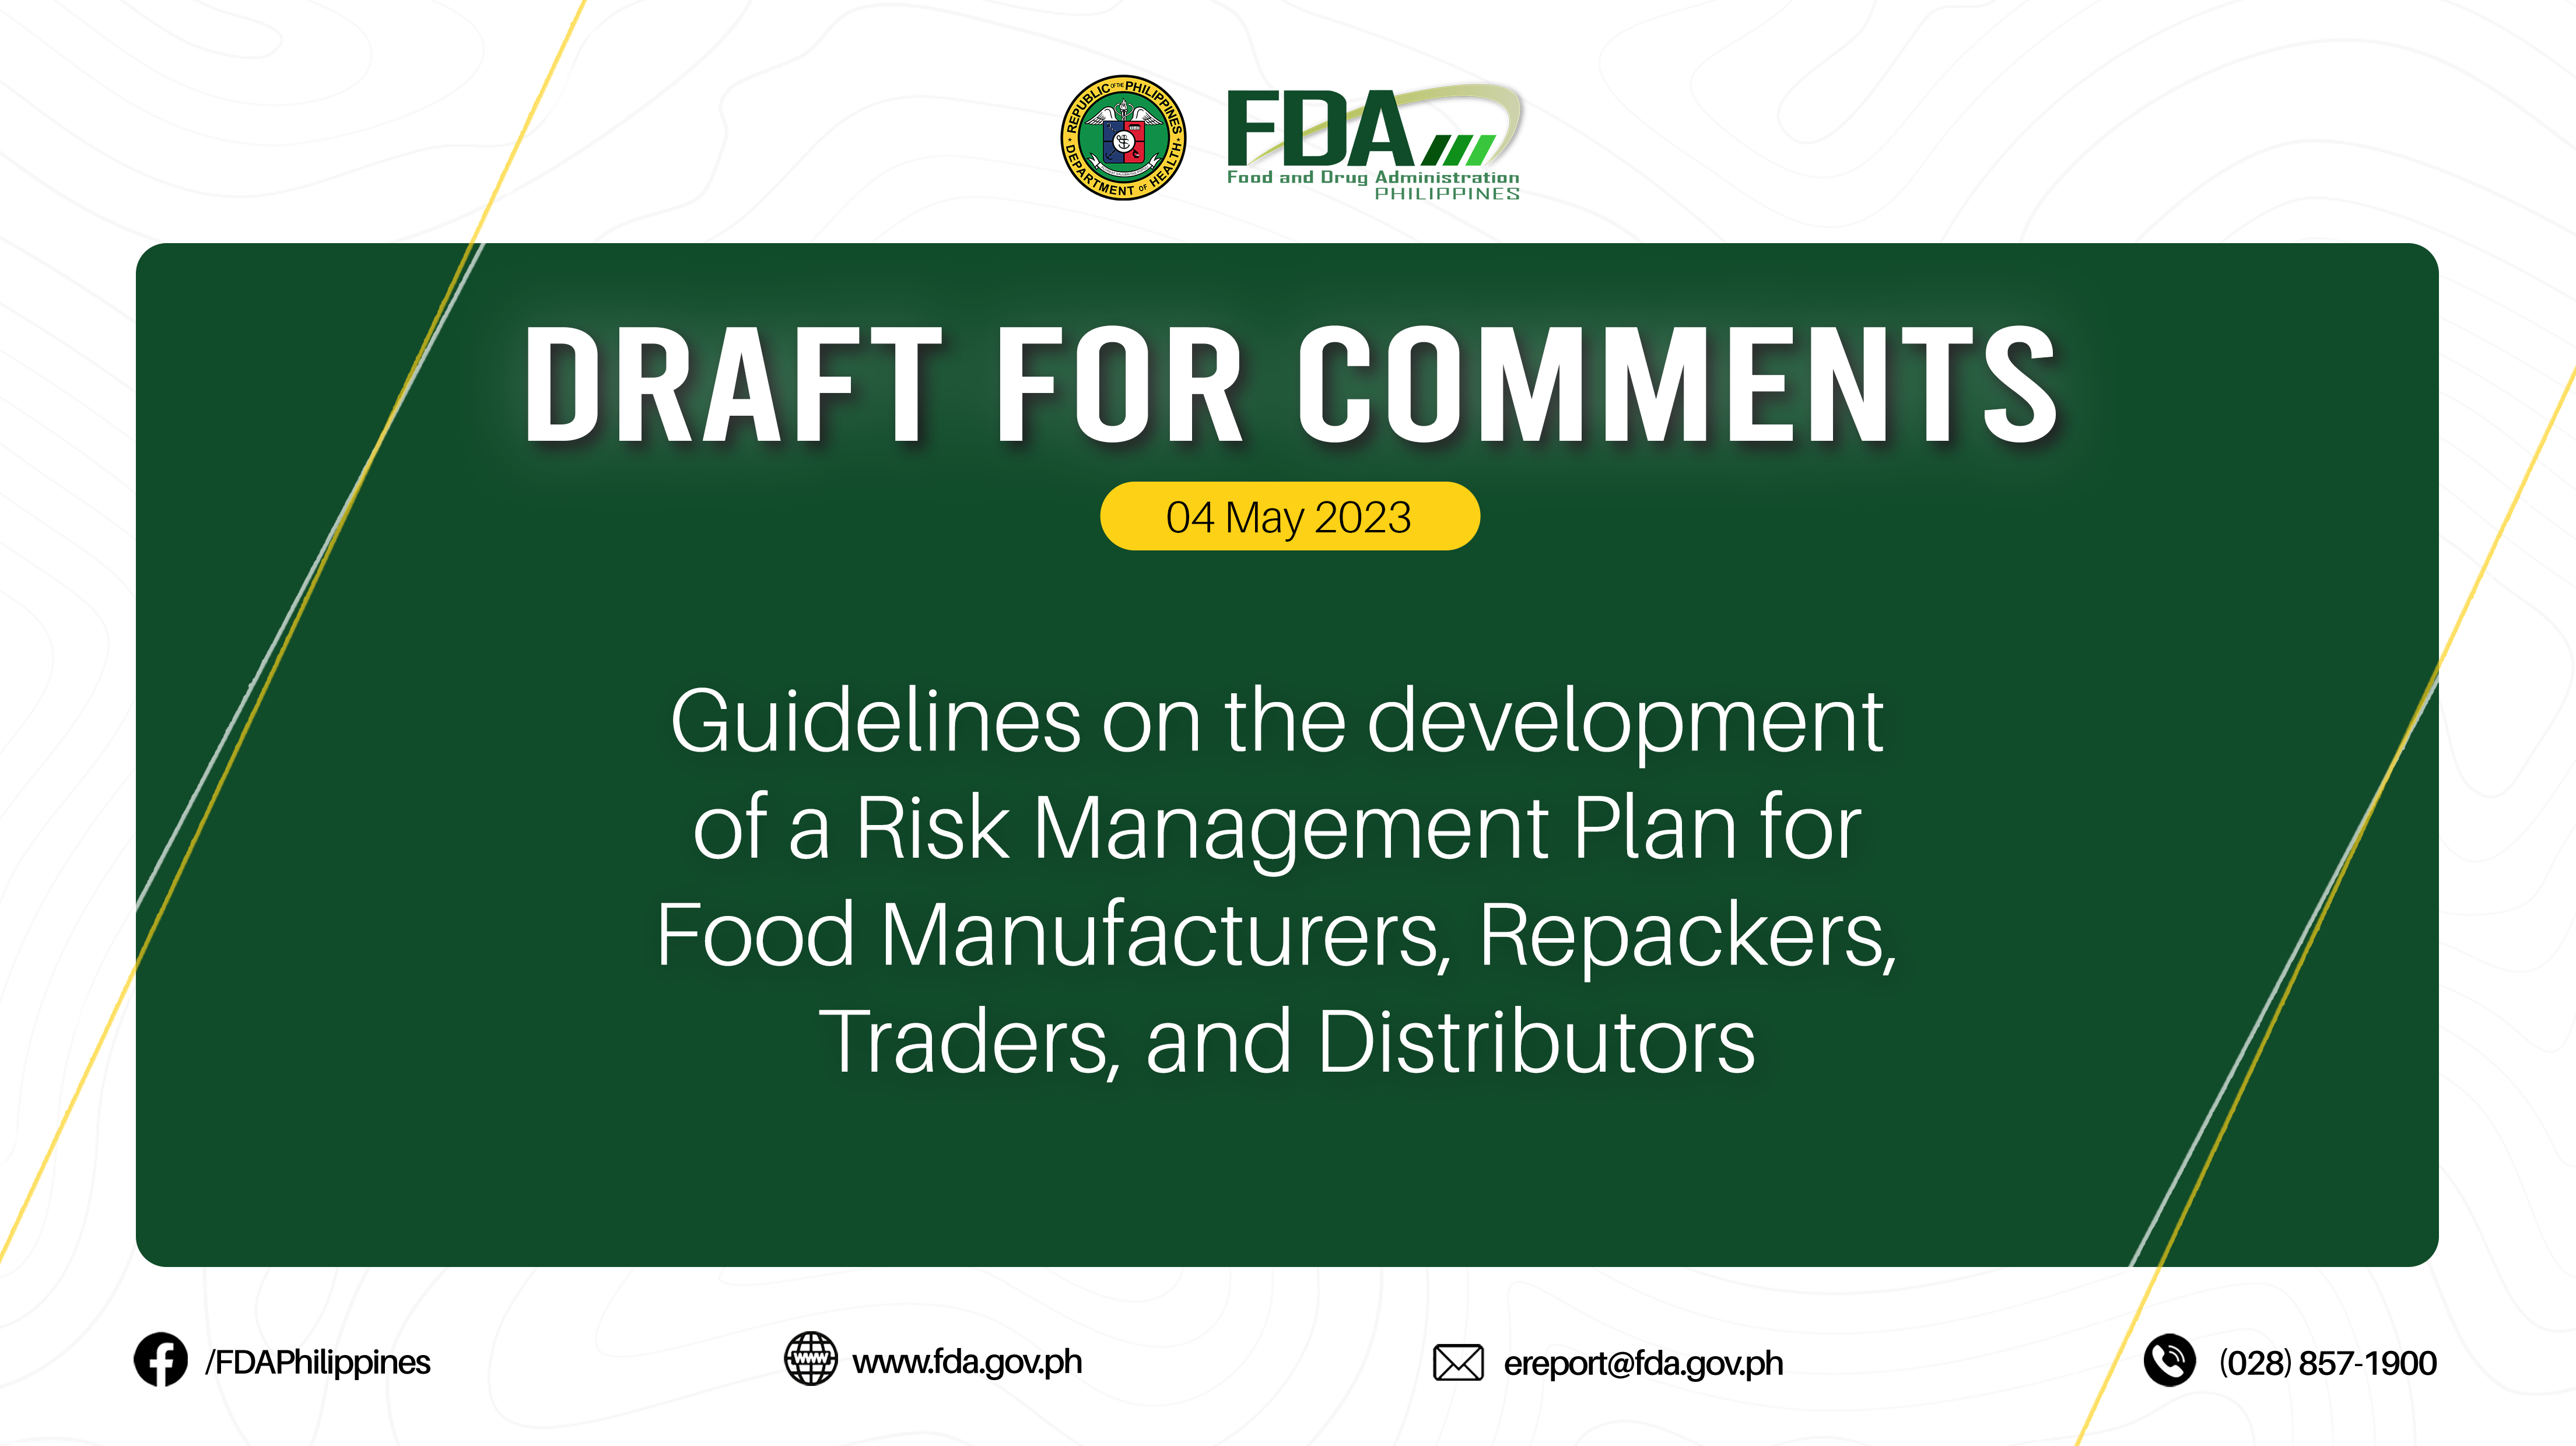 Draft for Comments || Guidelines on the development of a Risk Management Plan for Food Manufacturers, Repackers, Traders, and Distributors